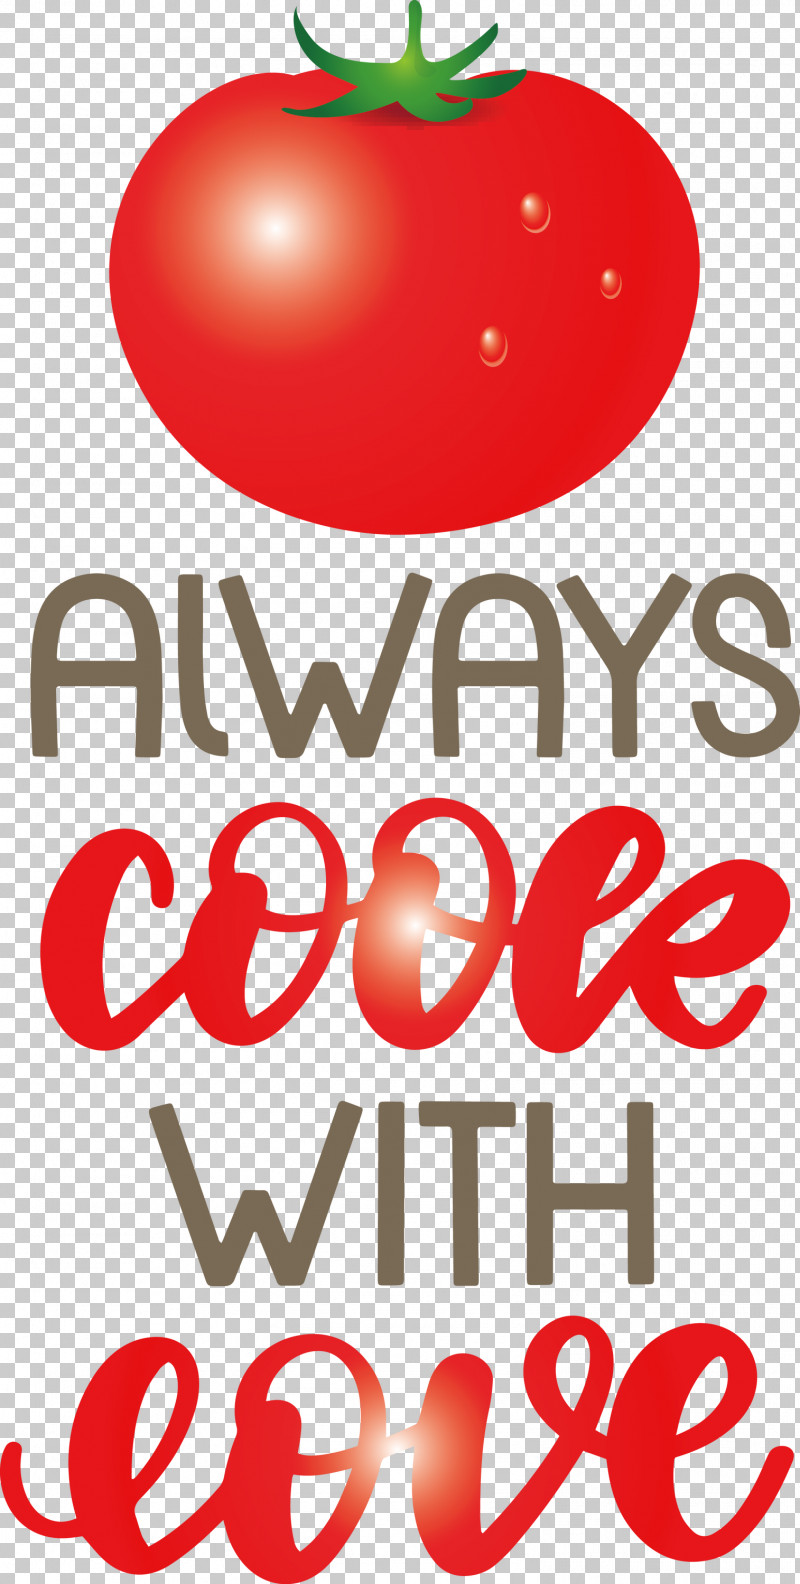 Always Cook With Love Food Kitchen PNG, Clipart, Apple, Food, Fruit, Geometry, Kitchen Free PNG Download